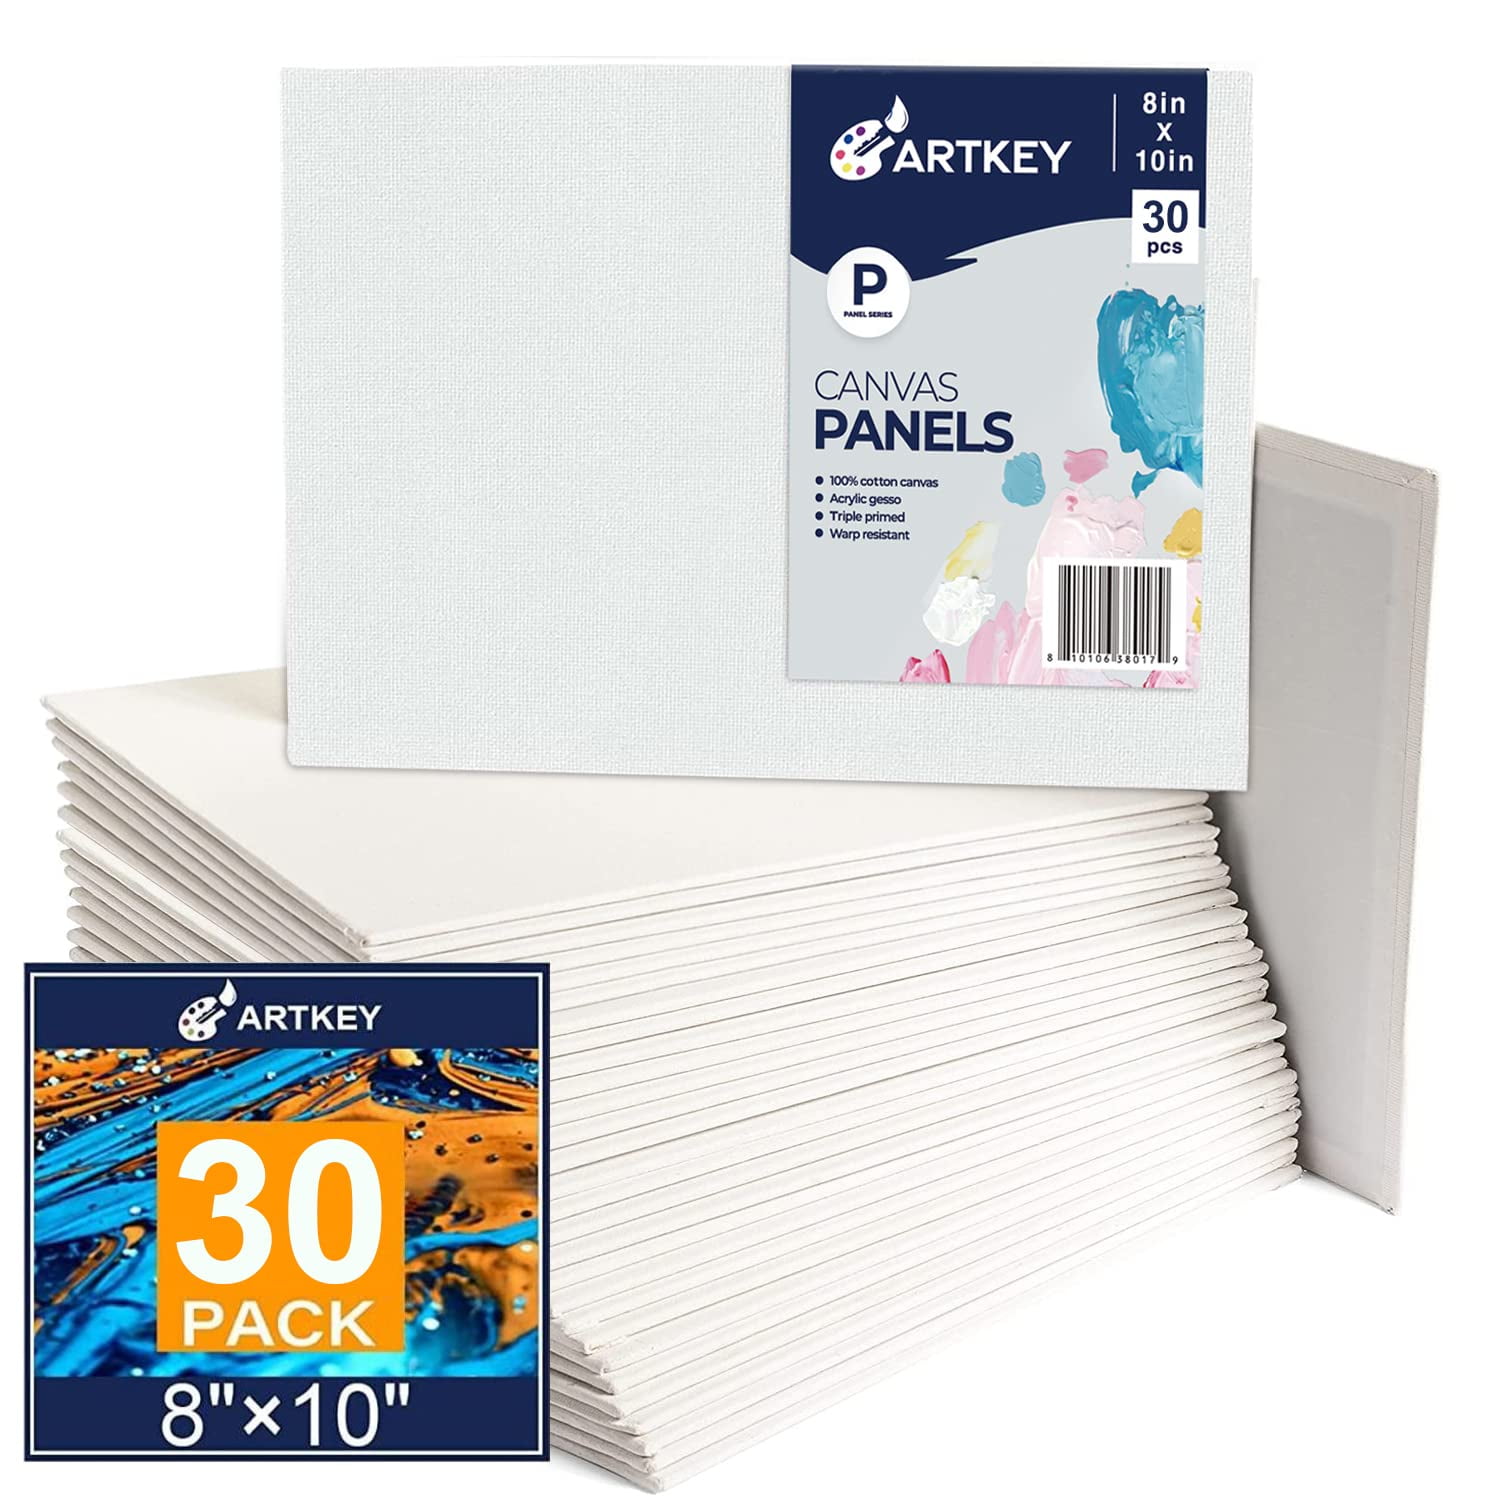 Artkey Canvas Panels 8x10 inch 12-Pack, 10 oz Double Primed Acid-Free 100% Cotton Paint Canvases for Painting, Blank Flat Canvas Board for Acrylics